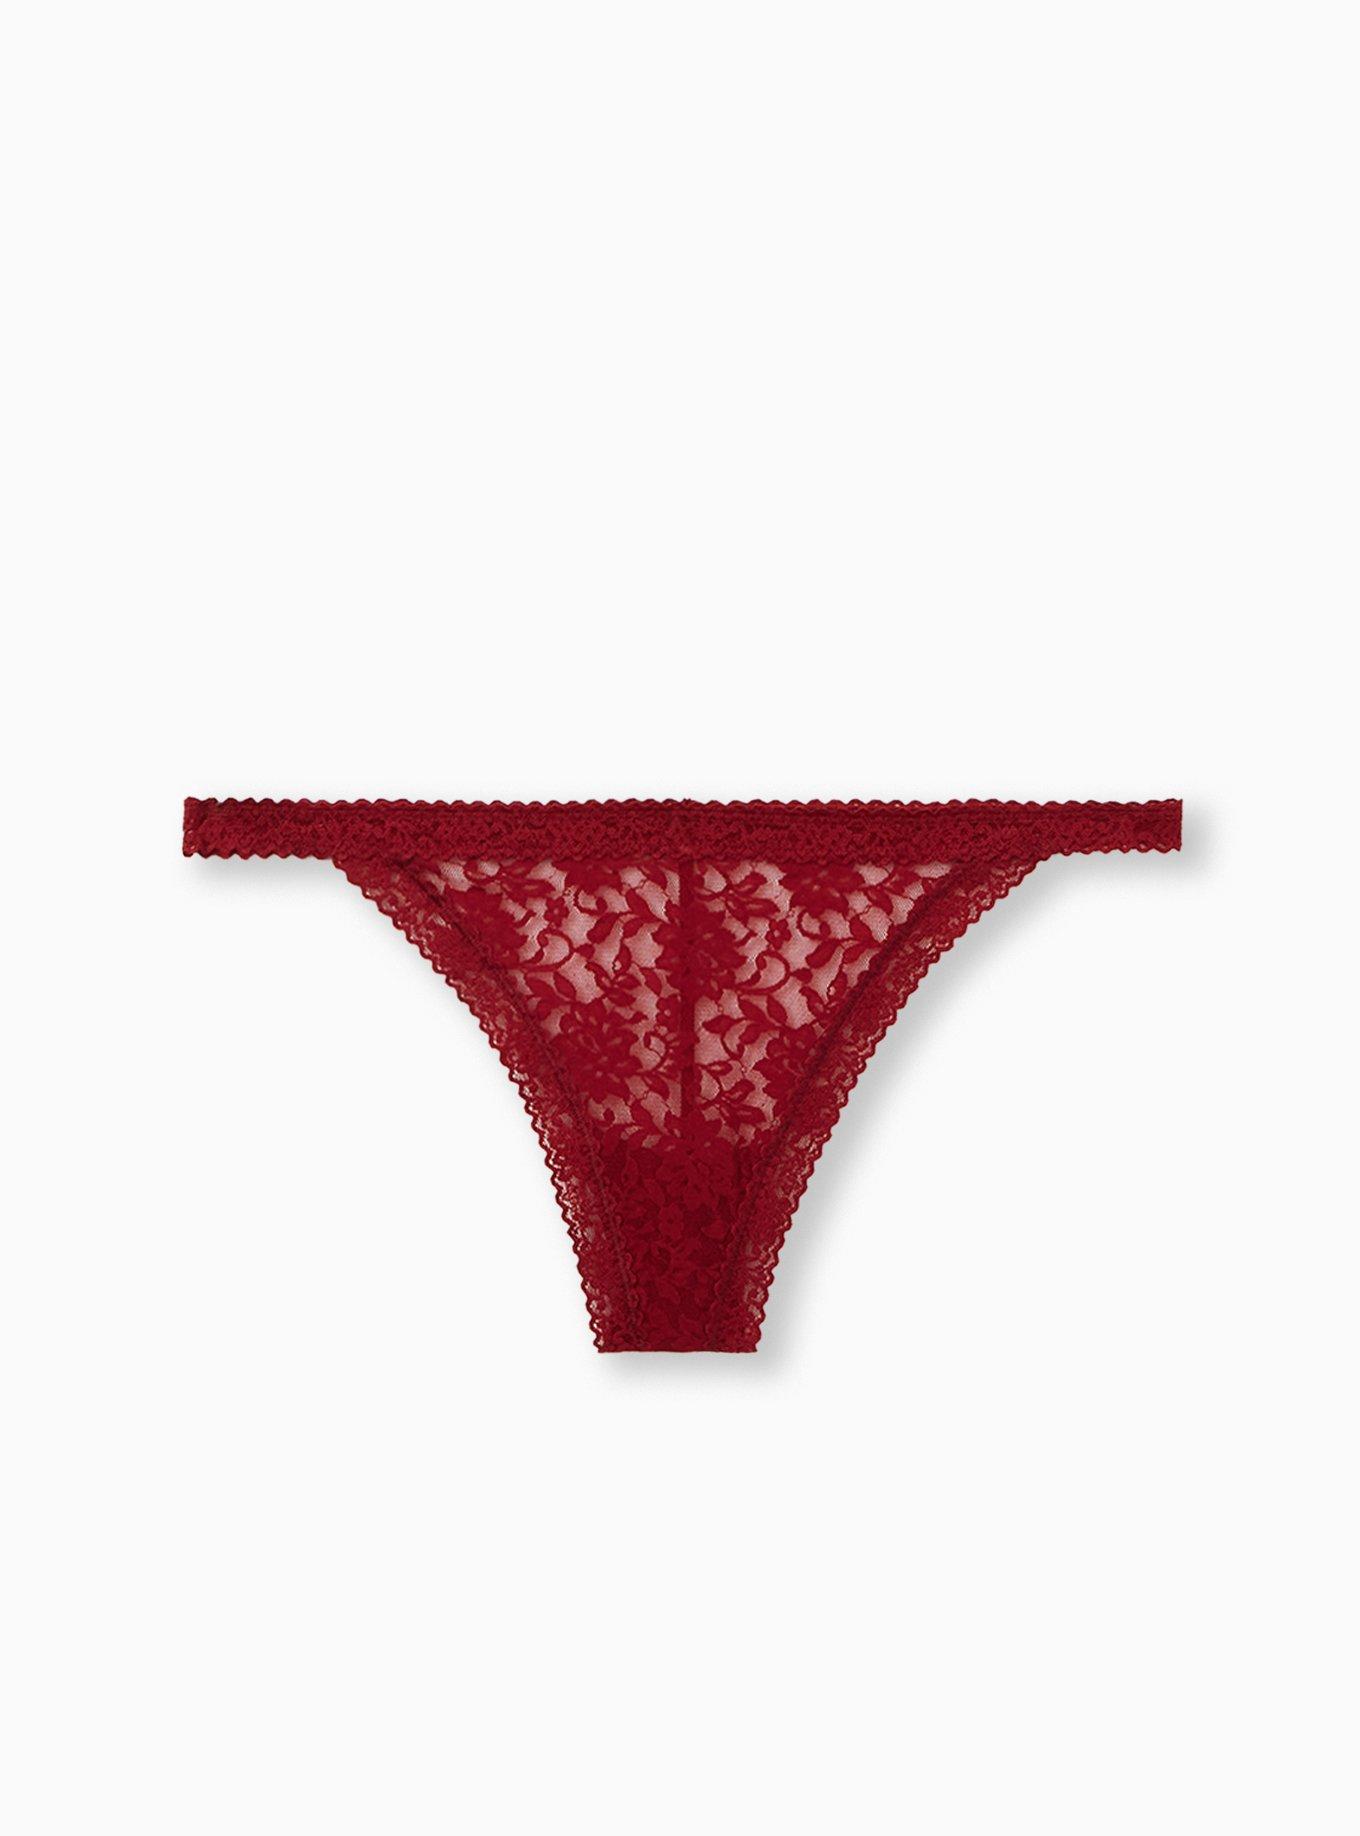 Cute Thanksgiving Turkey Women's Sexy G-String Low Rise Hipster Underwear  Thong Panties Stretch T-back